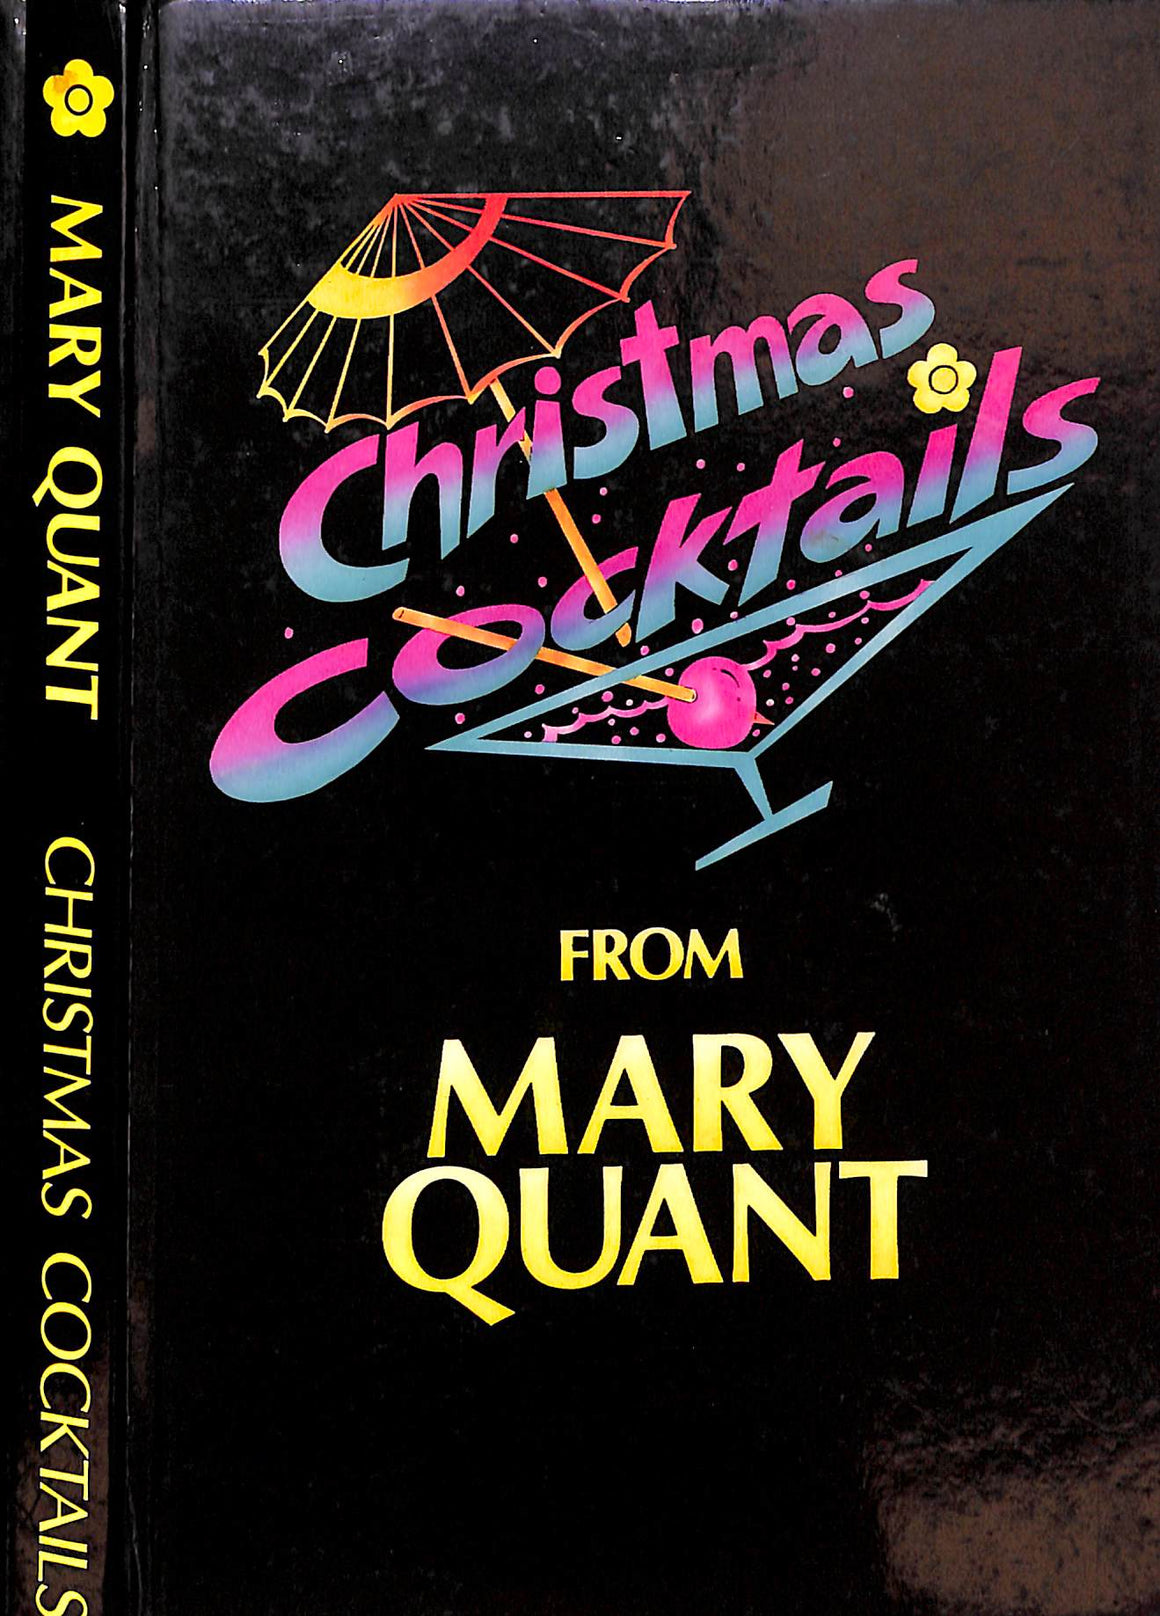 "Christmas Cocktails From Mary Quant" 1987 HOGG, Anthony